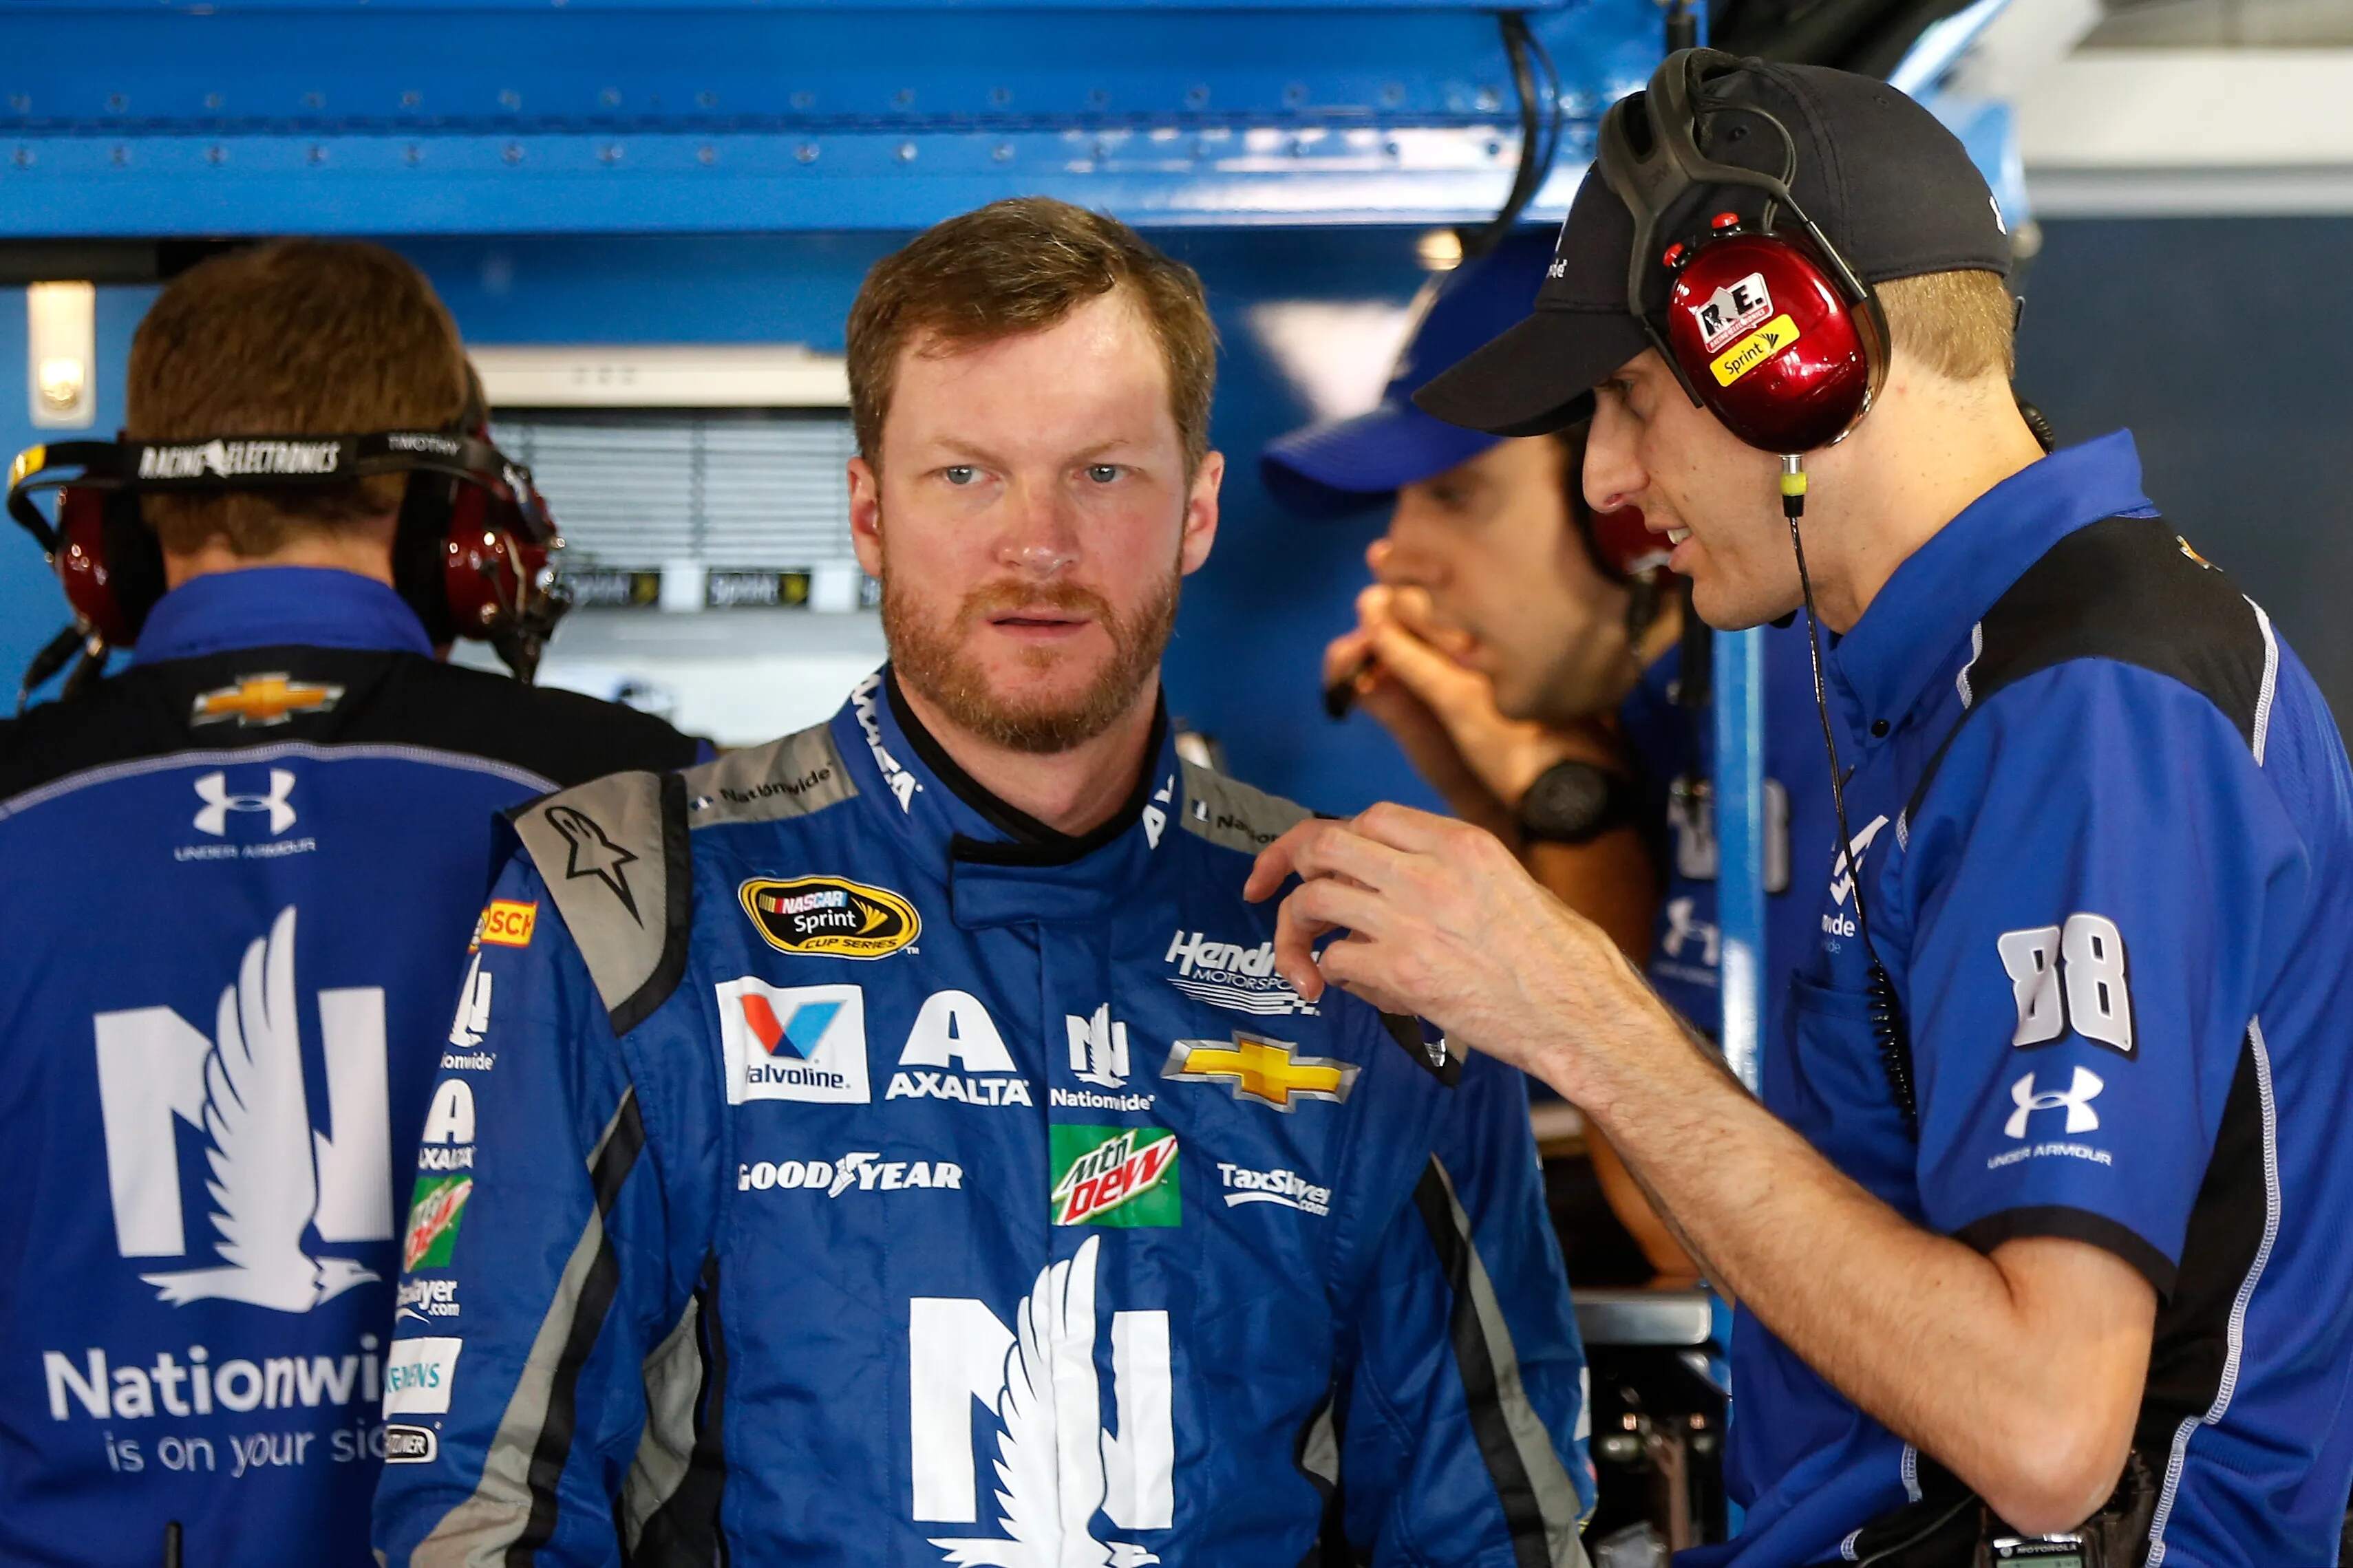 Dale Earnhardt Jr., driver of the #88 Nationwide Chevrolet, talks with a crew member in 2016